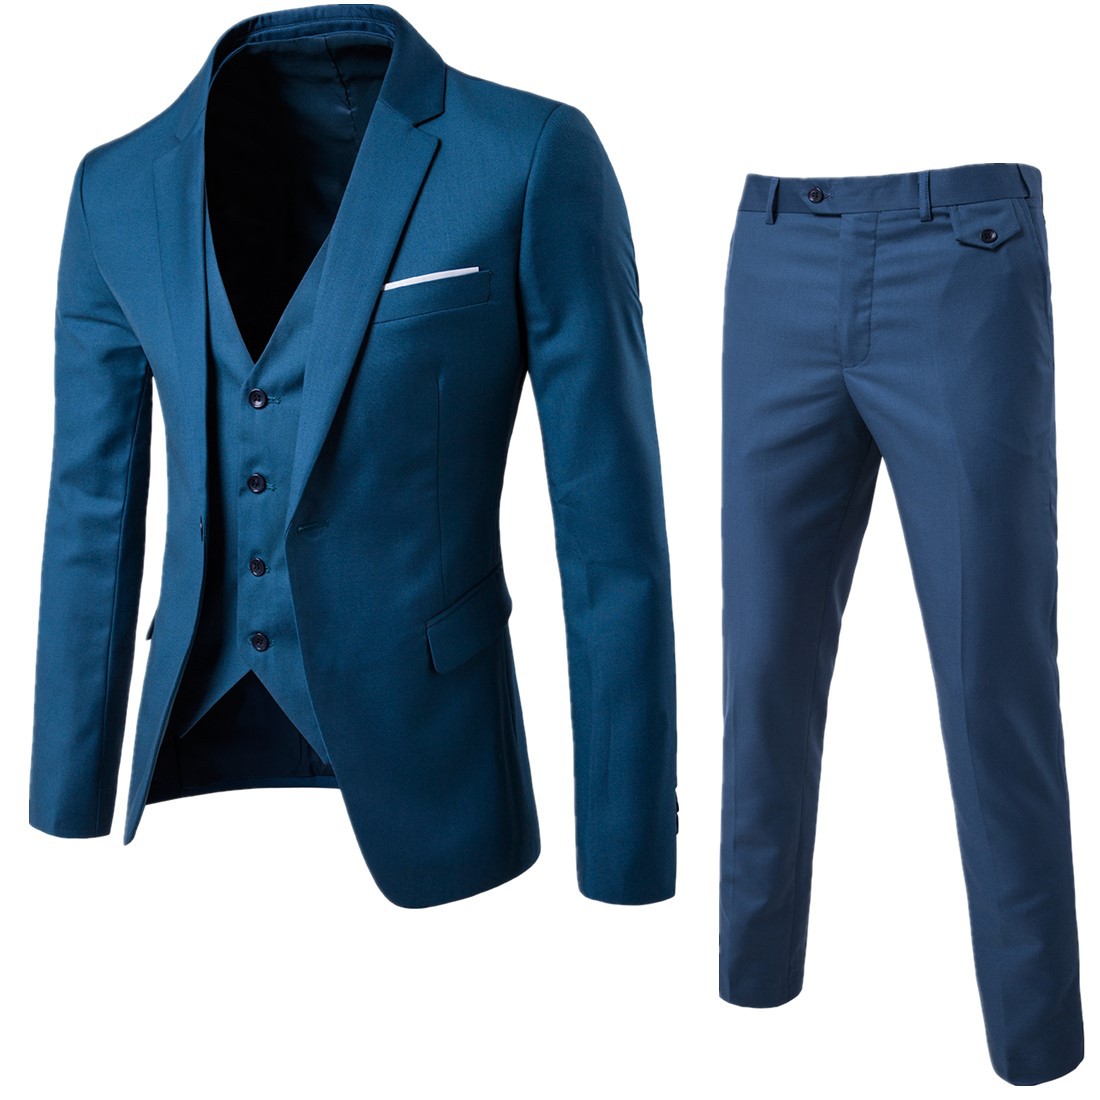 Factory direct sale of spring and summer 2020 thin men's suit three piece suit Korean slim casual suit wedding dress